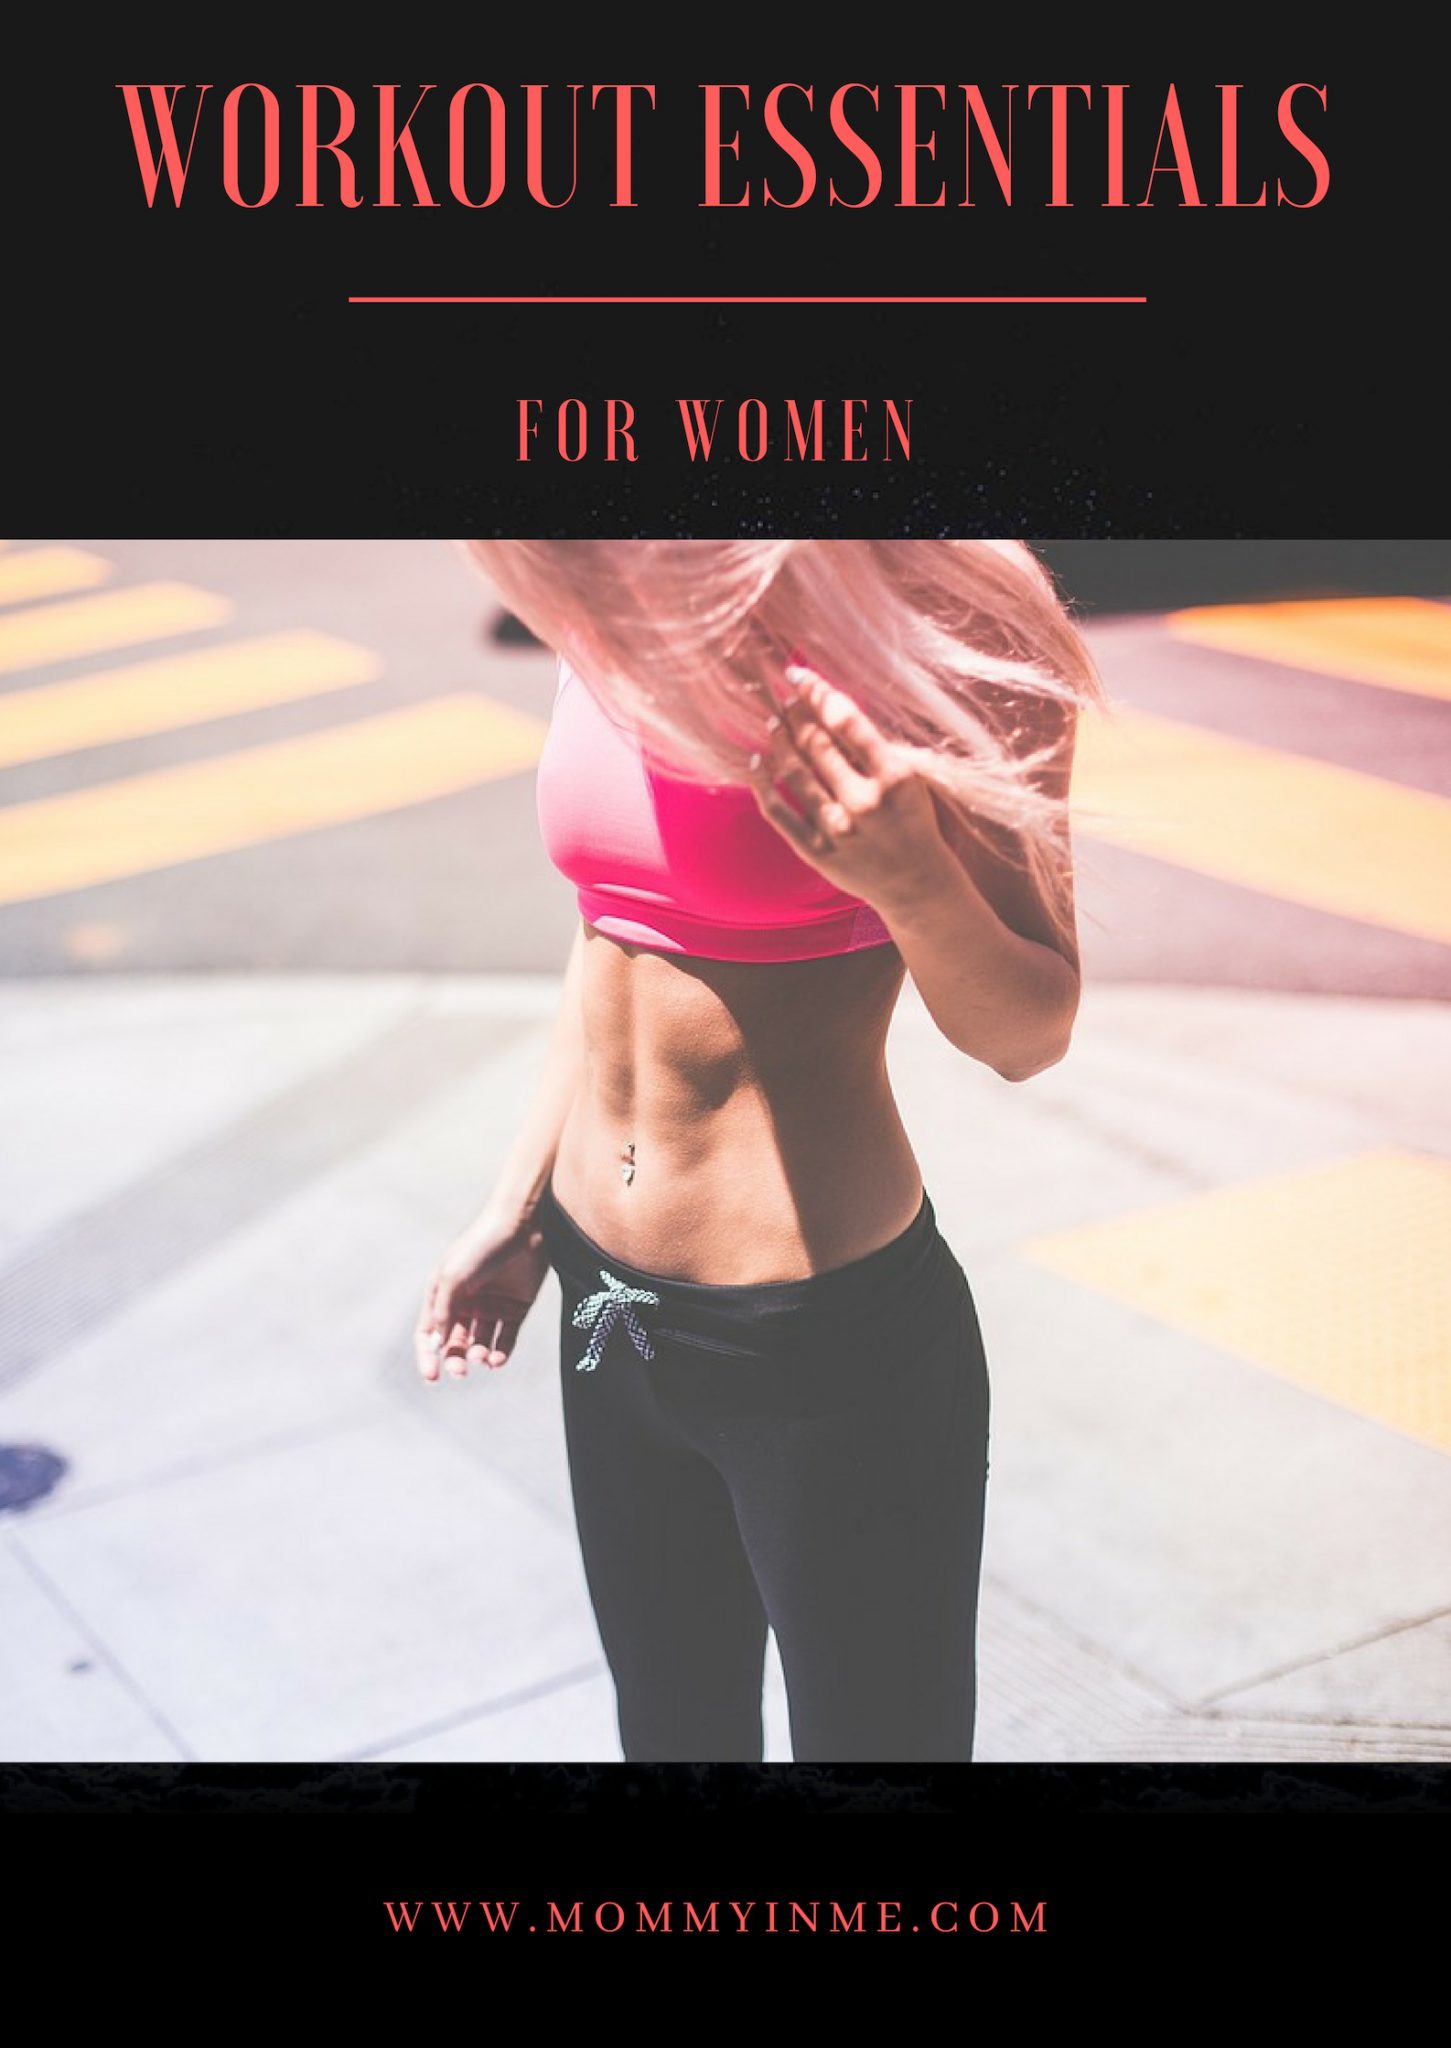 Are you a fitness freak? Even if you aren’t one, I’m sure we all have workouts build in our daily lives in one form or another. Be it cycling or Dancing or Exercising or Aerobics or Gymming, some form of physical activity is a necessity for a healthy lifestyle. Here is the Workout Bag essential for women. #Gym #workout #exercising #Gym Bag #Gym essentials #activewear #Zivame